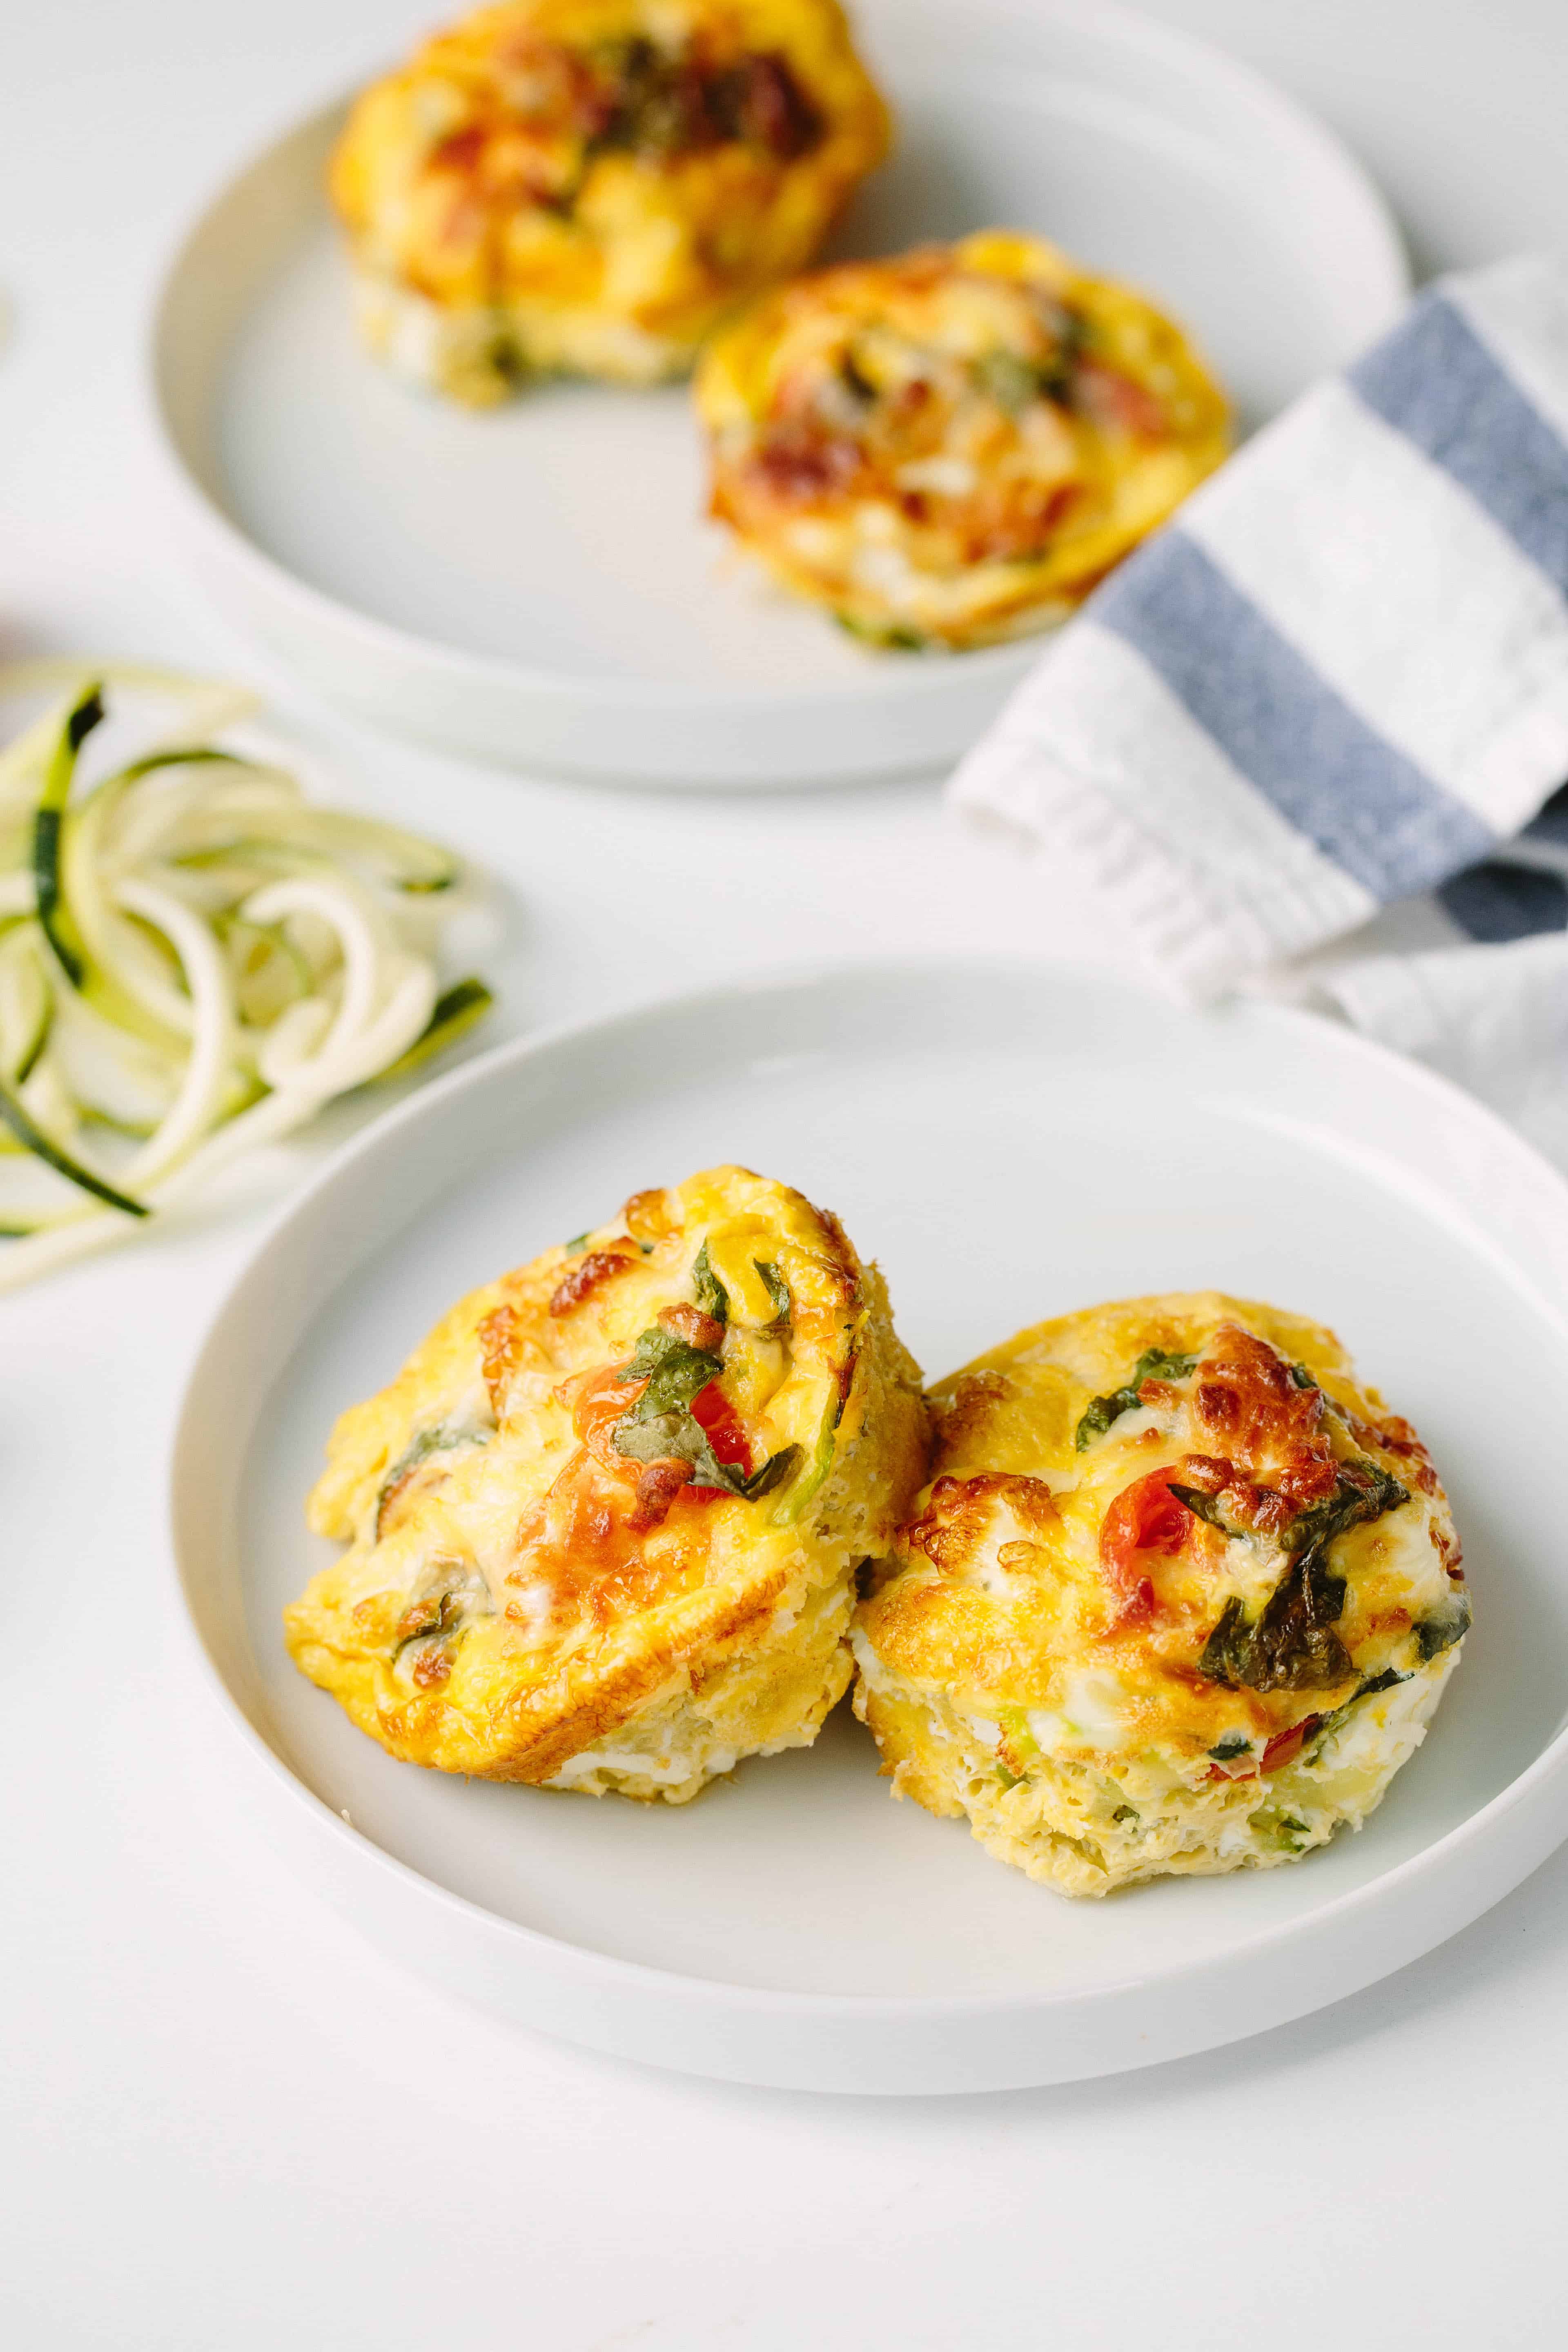 Inspiralized: Summer Egg Muffins with Zucchini Noodles